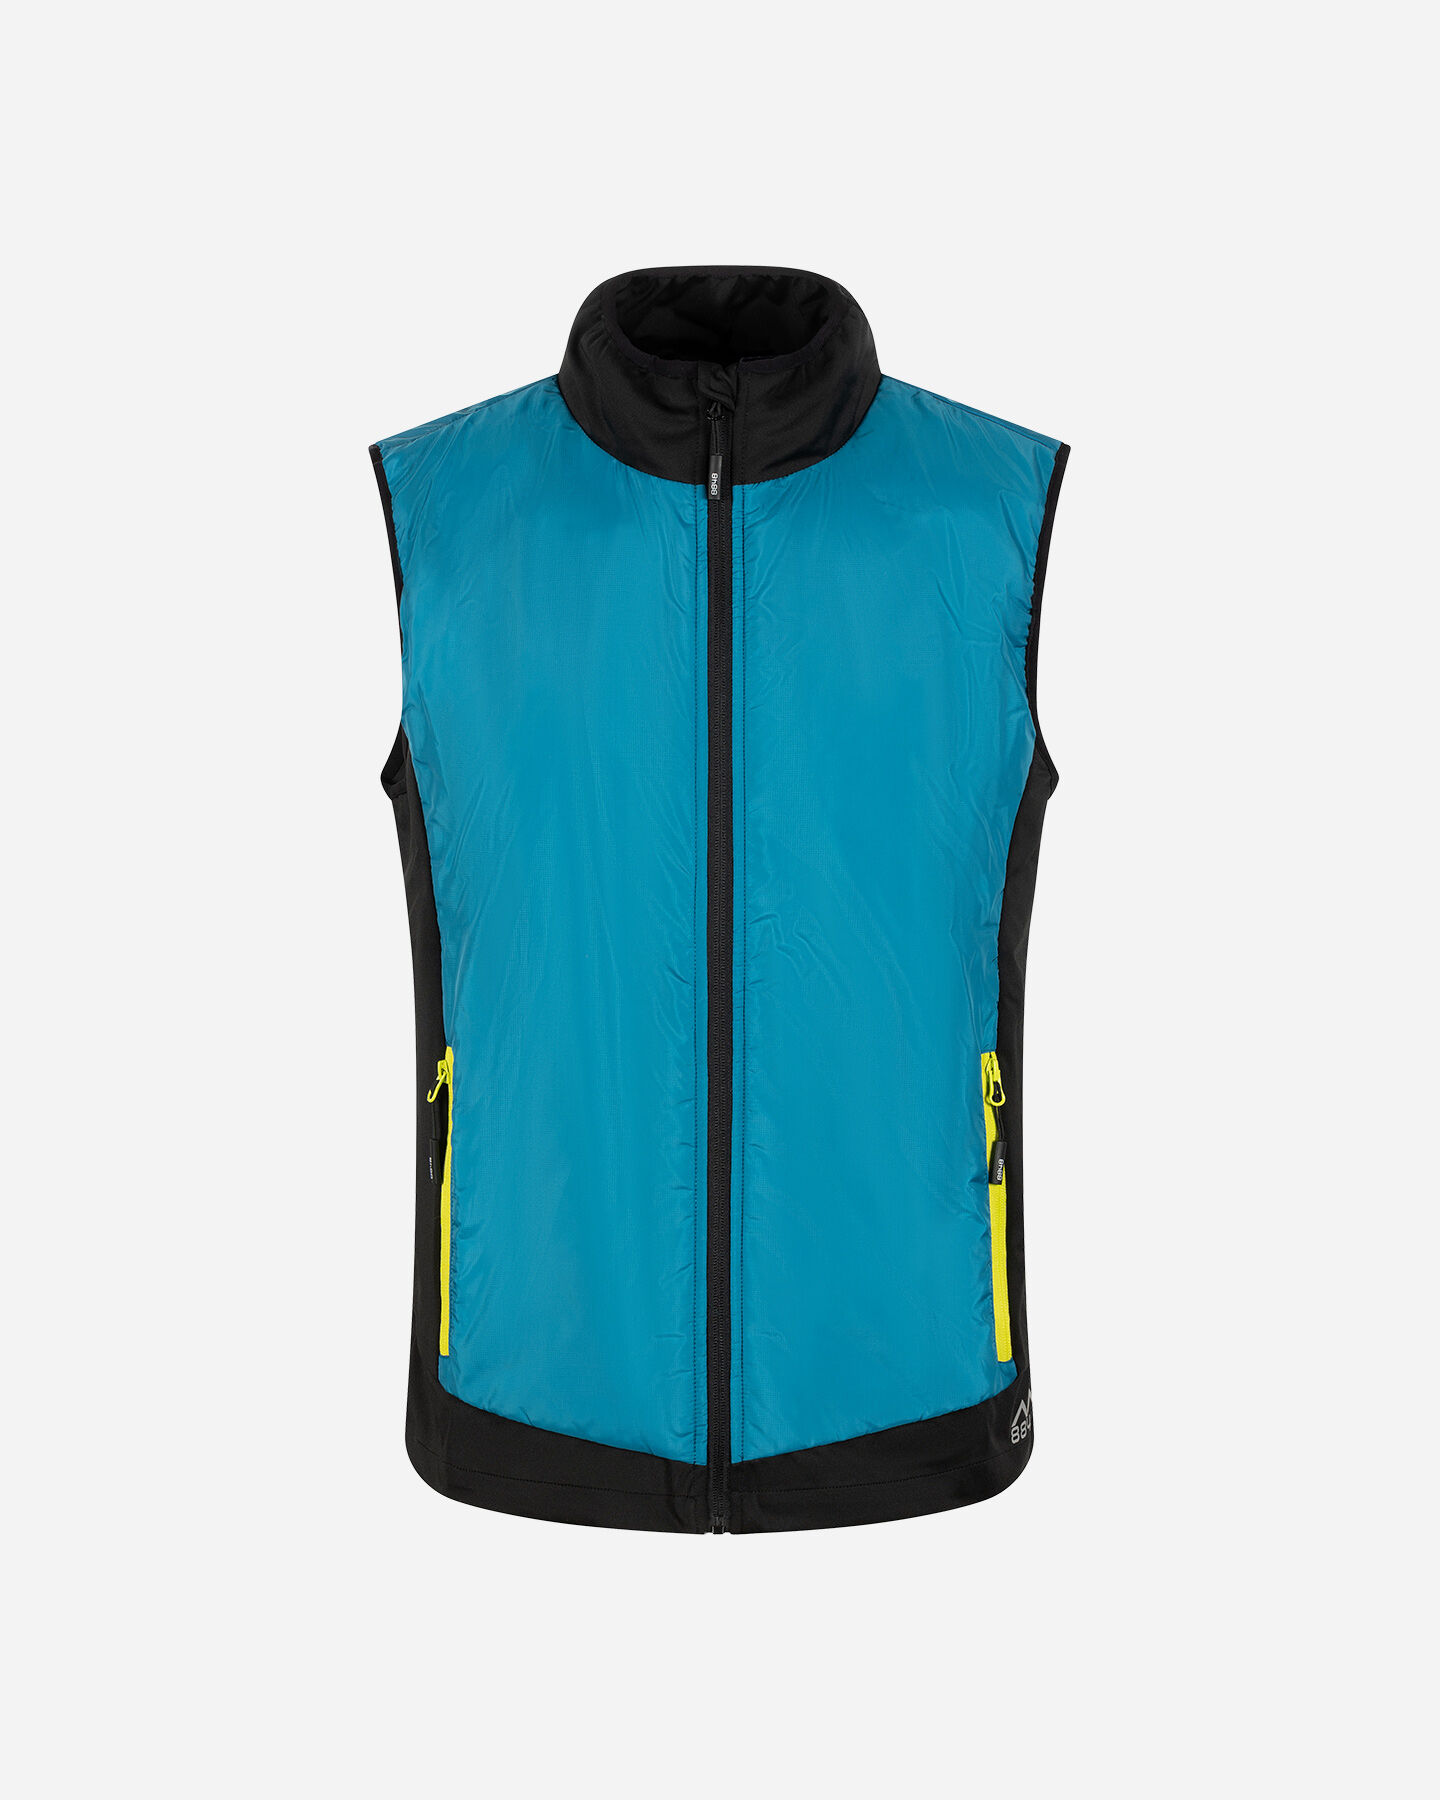  Gilet 8848 MOUNTAIN HIKE M S4130909|1167/050|S scatto 0